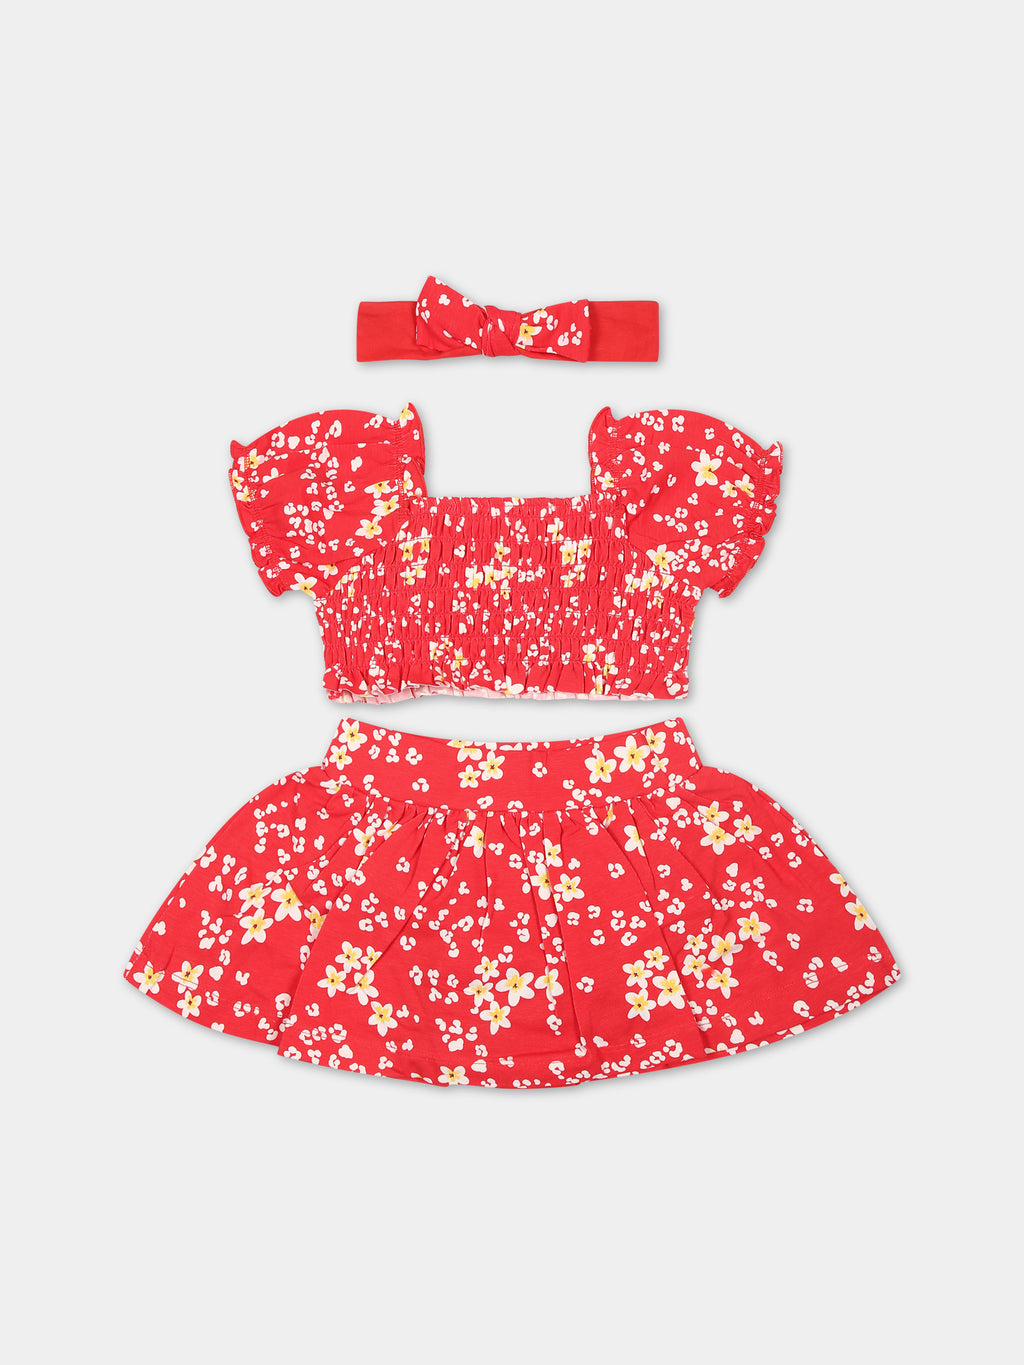 Red suit for baby girl with flowers print